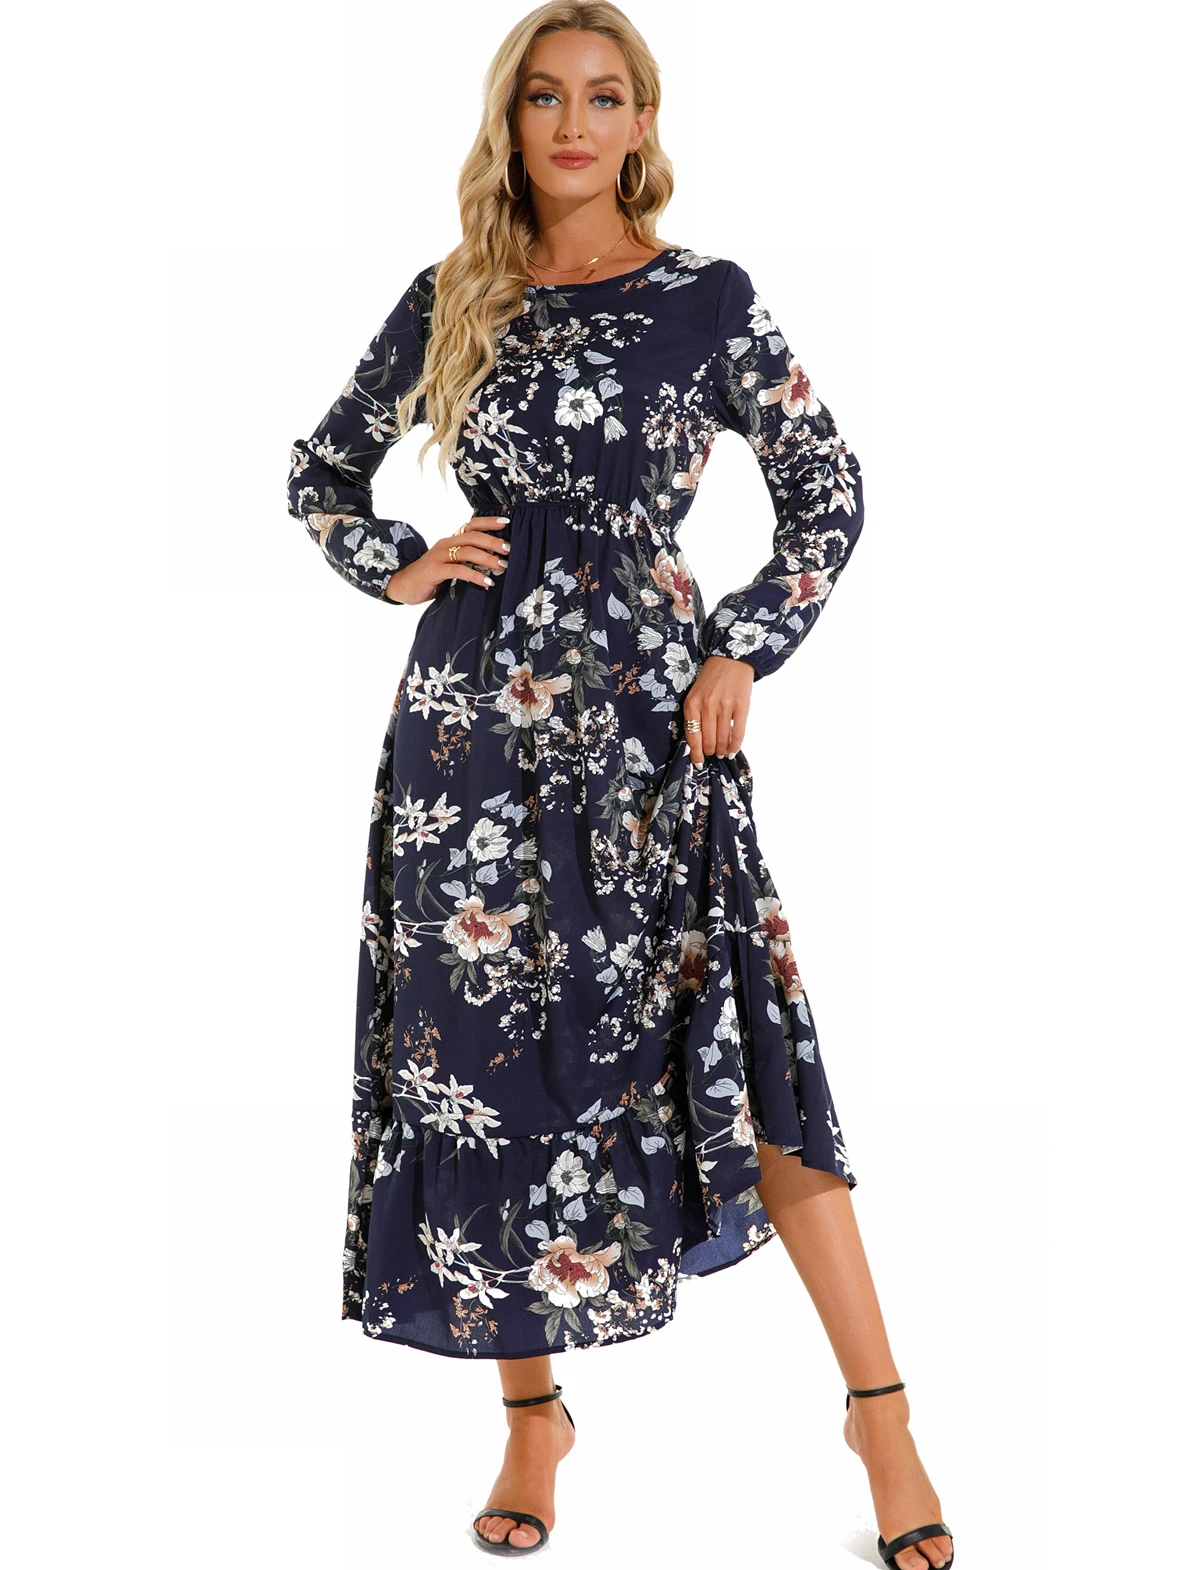 Women Elegant Floral Printed Long Dresses Spring Summer Casual O Neck Long Sleeve Ladies Chic High Waist A Line Beach Dresses images - 6